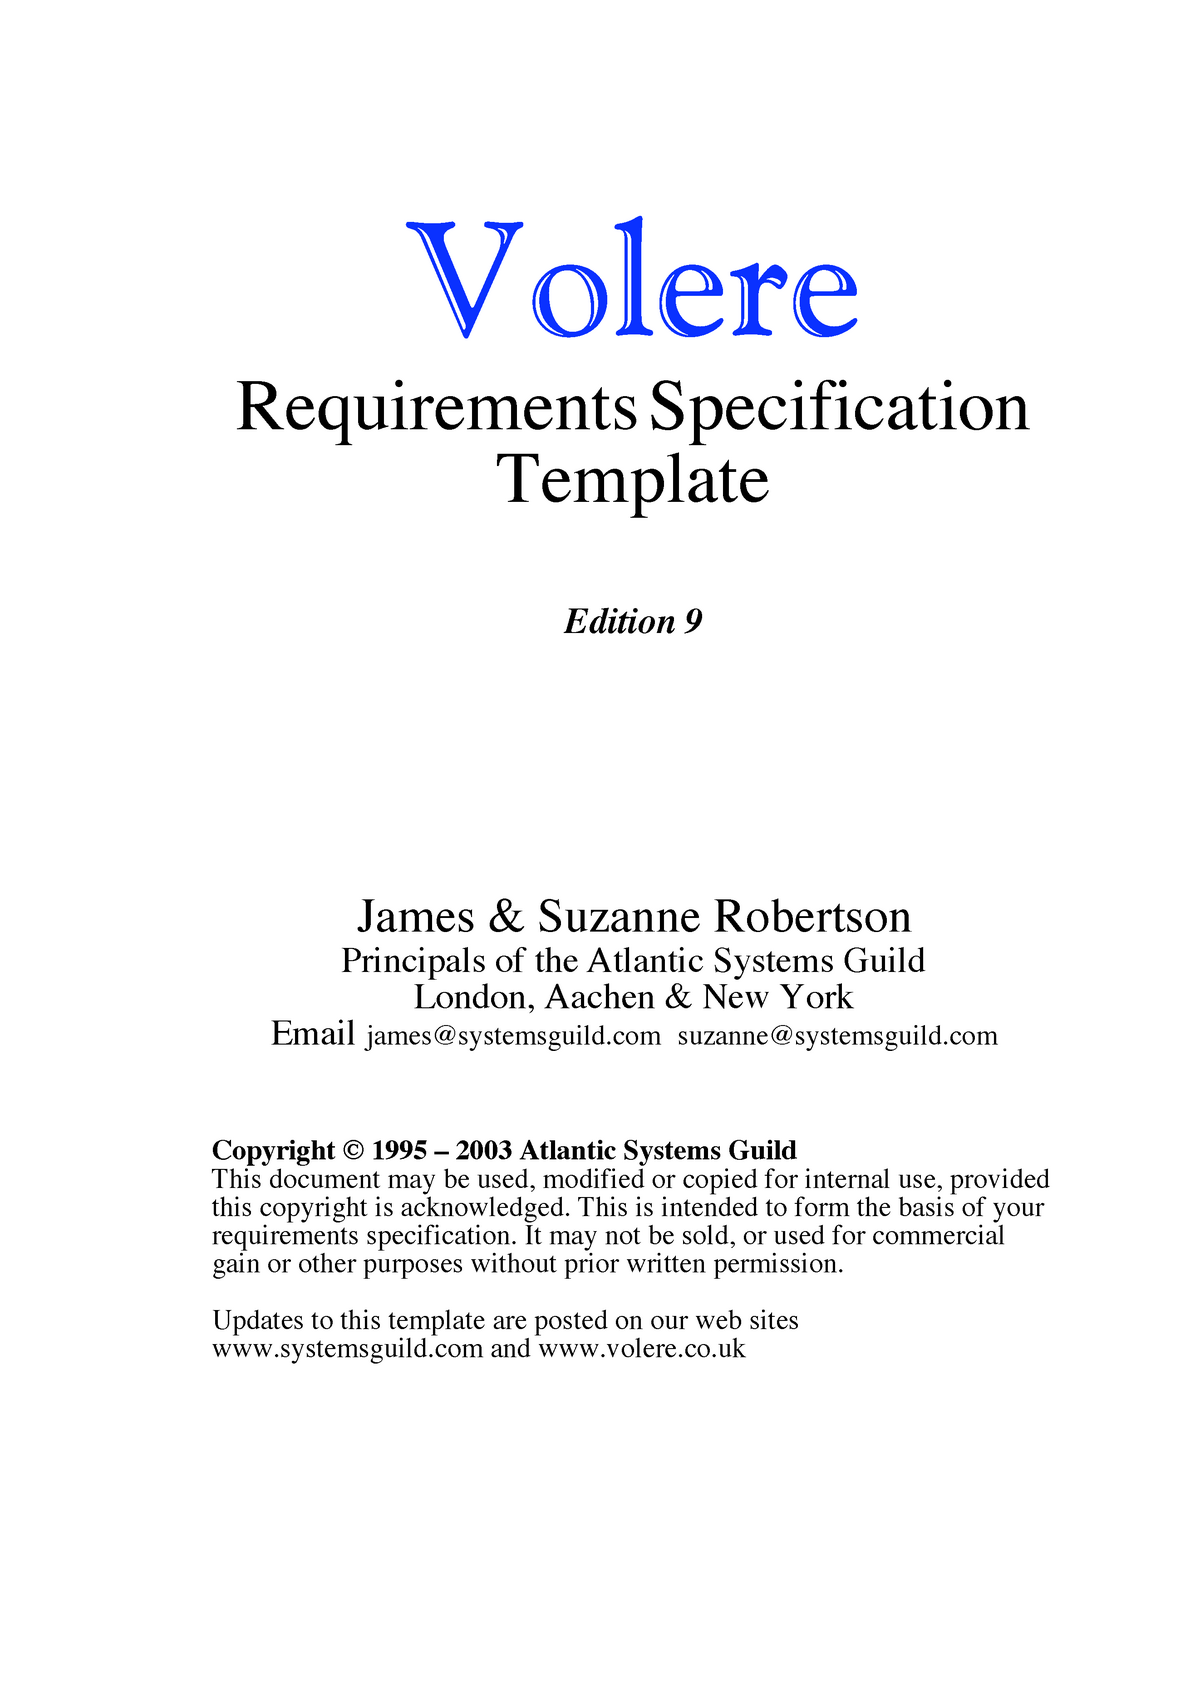 volere-template-v9-2003-foo-bar-volere-requirements-specification